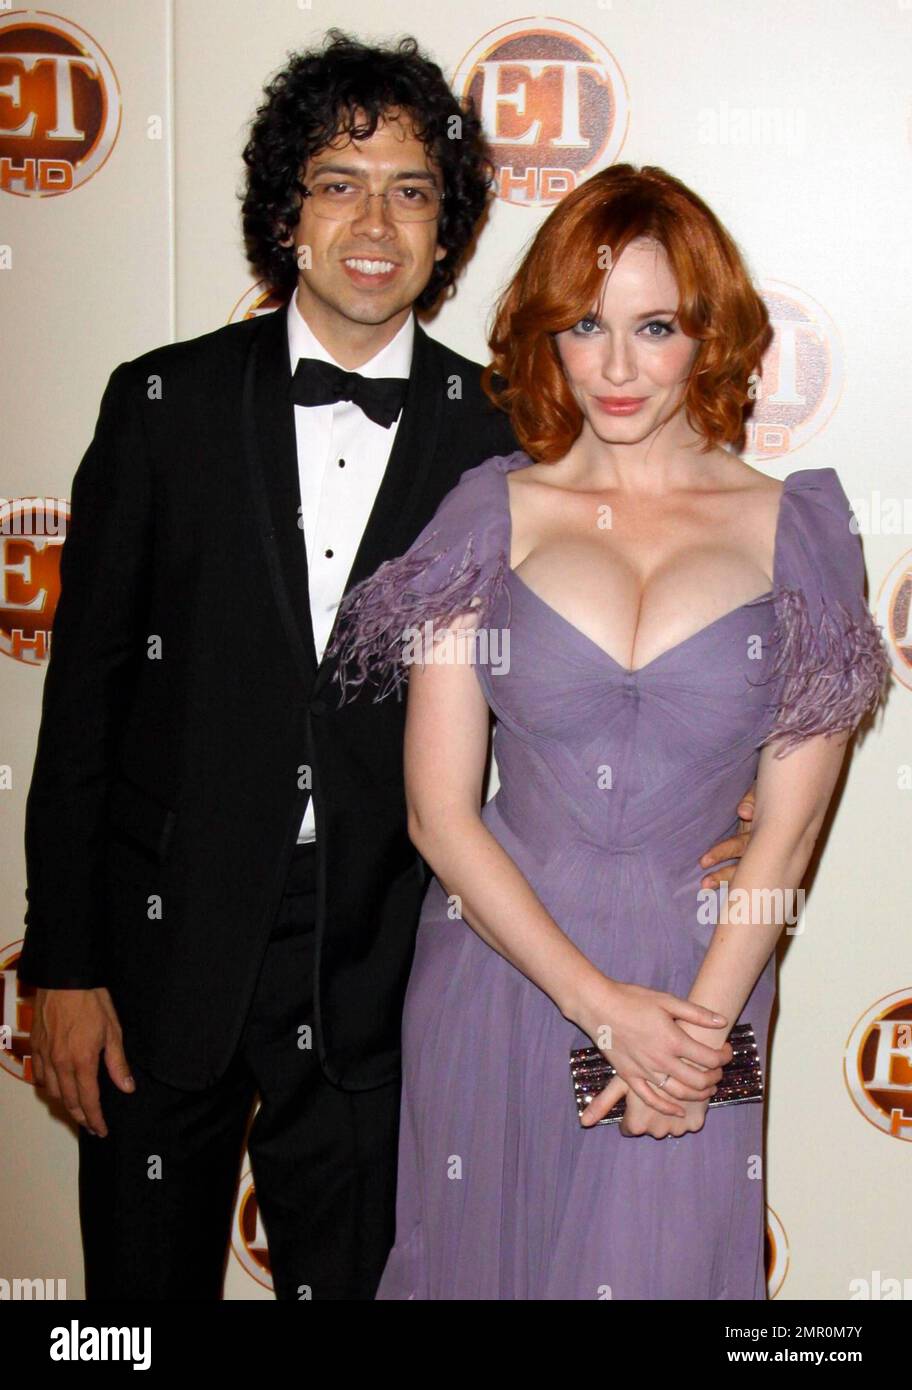 Christina Hendricks with her husband Geoffrey Arend at the Entertainment Tonight Emmy's After Party at Vibiana in Los Angeles, CA. 8/29/10. Stock Photo